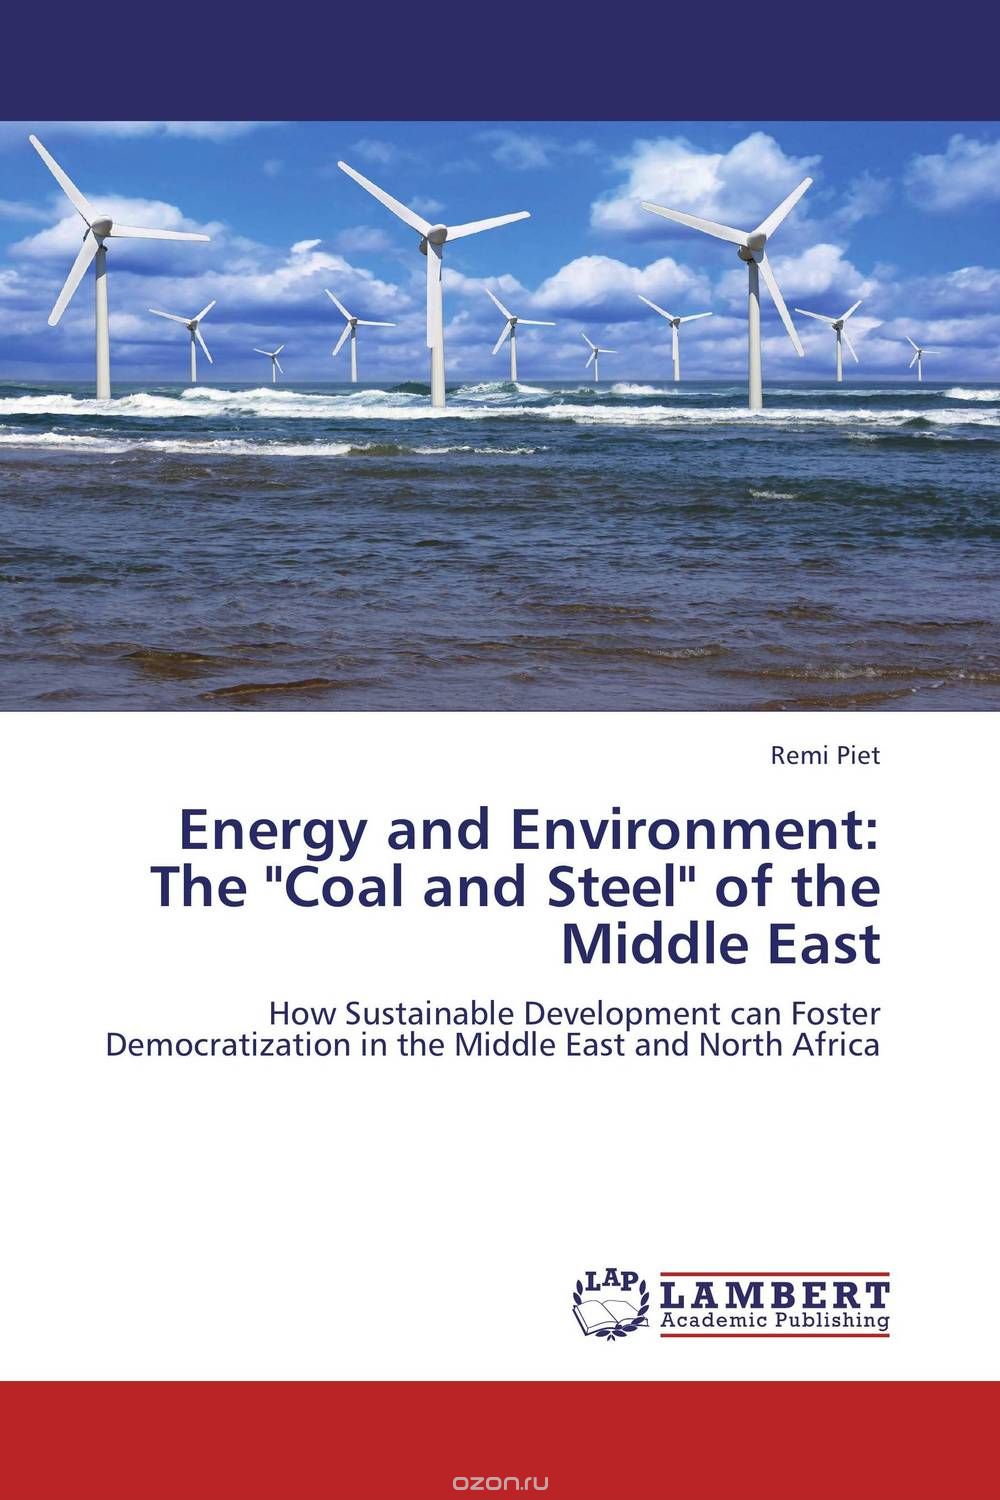 Скачать книгу "Energy and Environment: The "Coal and Steel" of the Middle East"